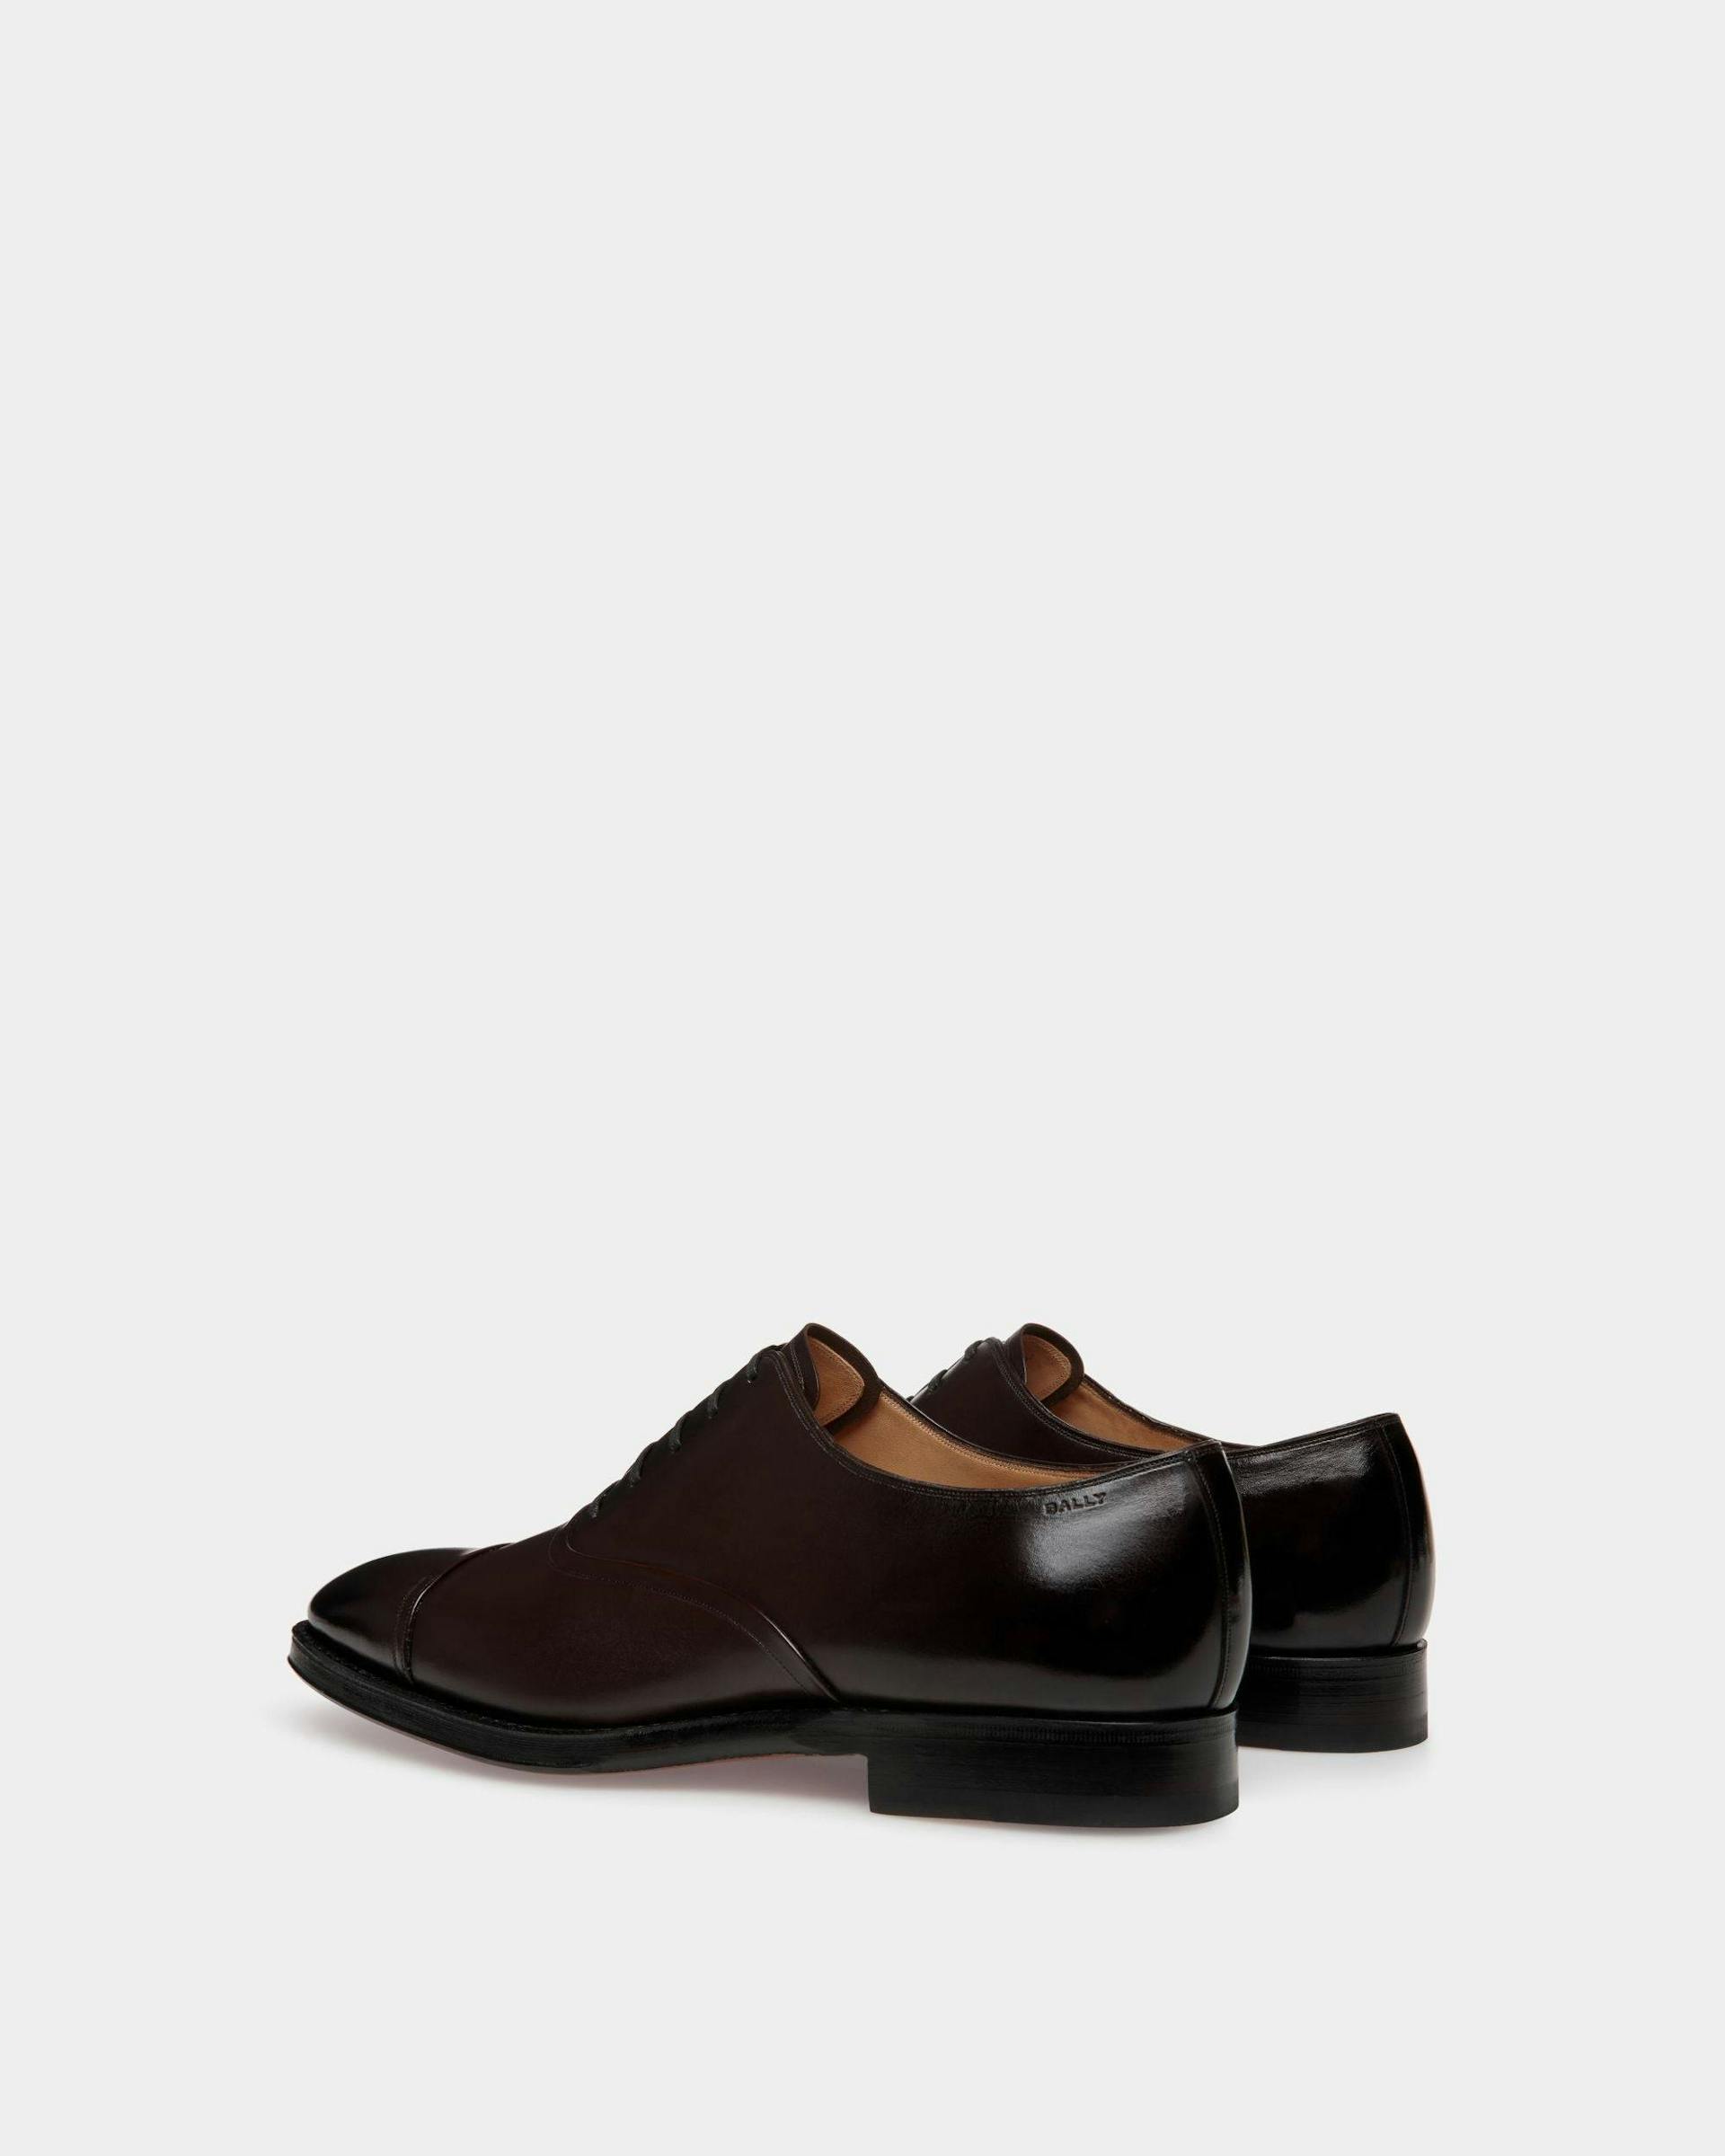 Men's Scribe Oxford Shoes In Brown Leather | Bally | Still Life 3/4 Back